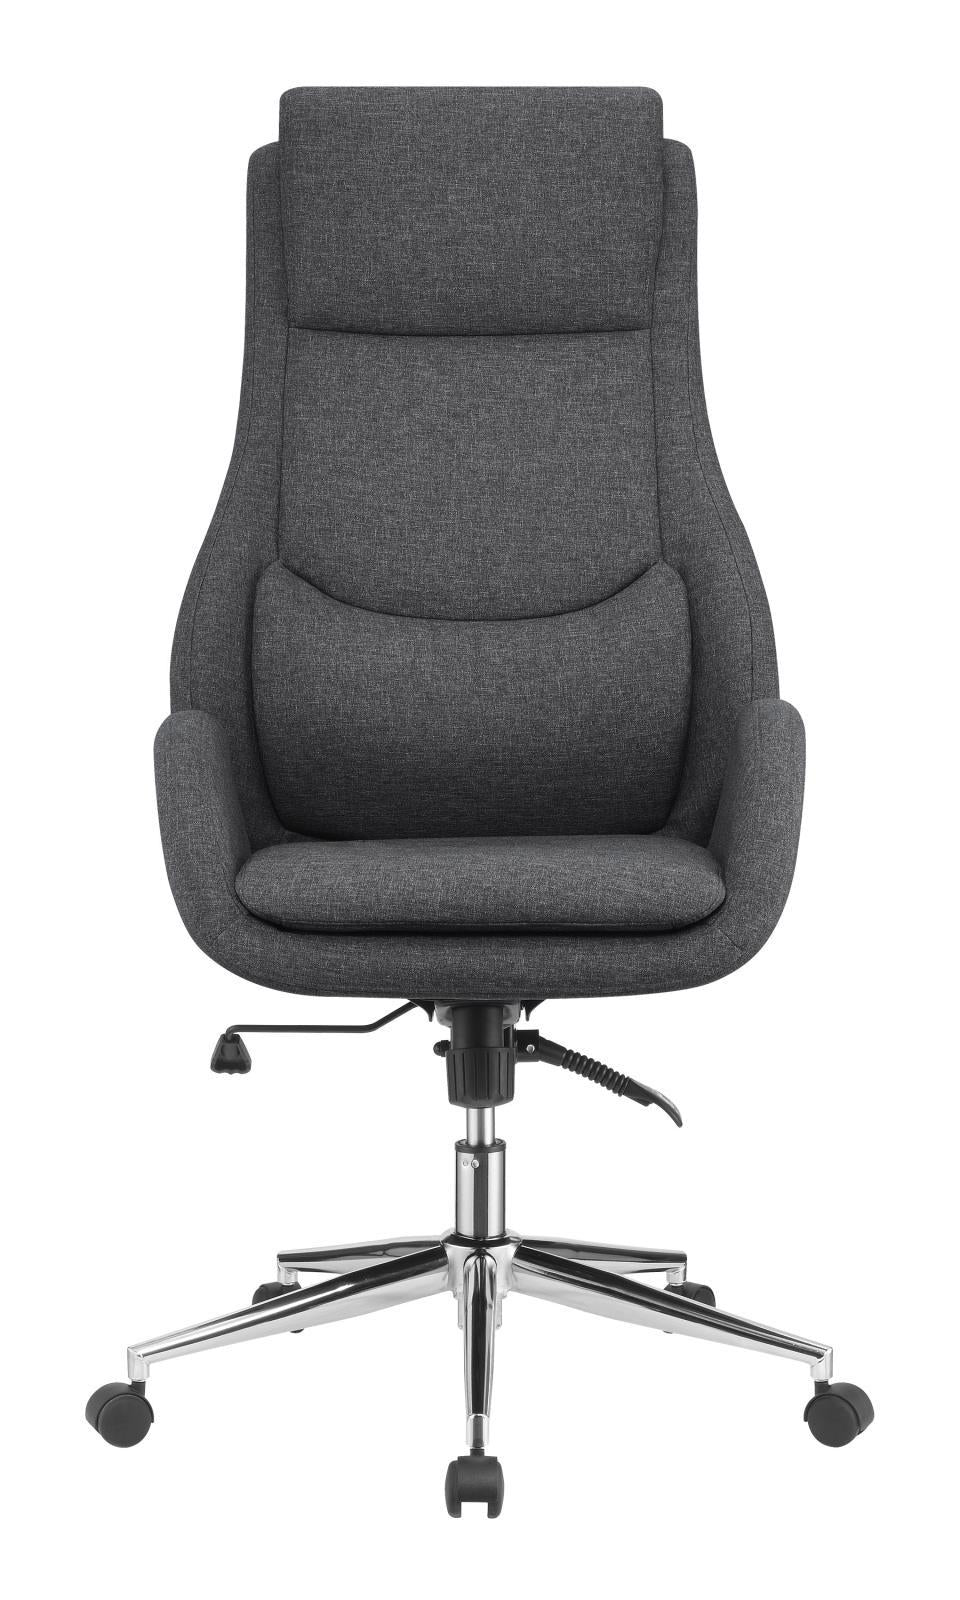 Cruz Upholstered Office Chair with Padded Seat Grey and Chrome Cruz Upholstered Office Chair with Padded Seat Grey and Chrome Half Price Furniture